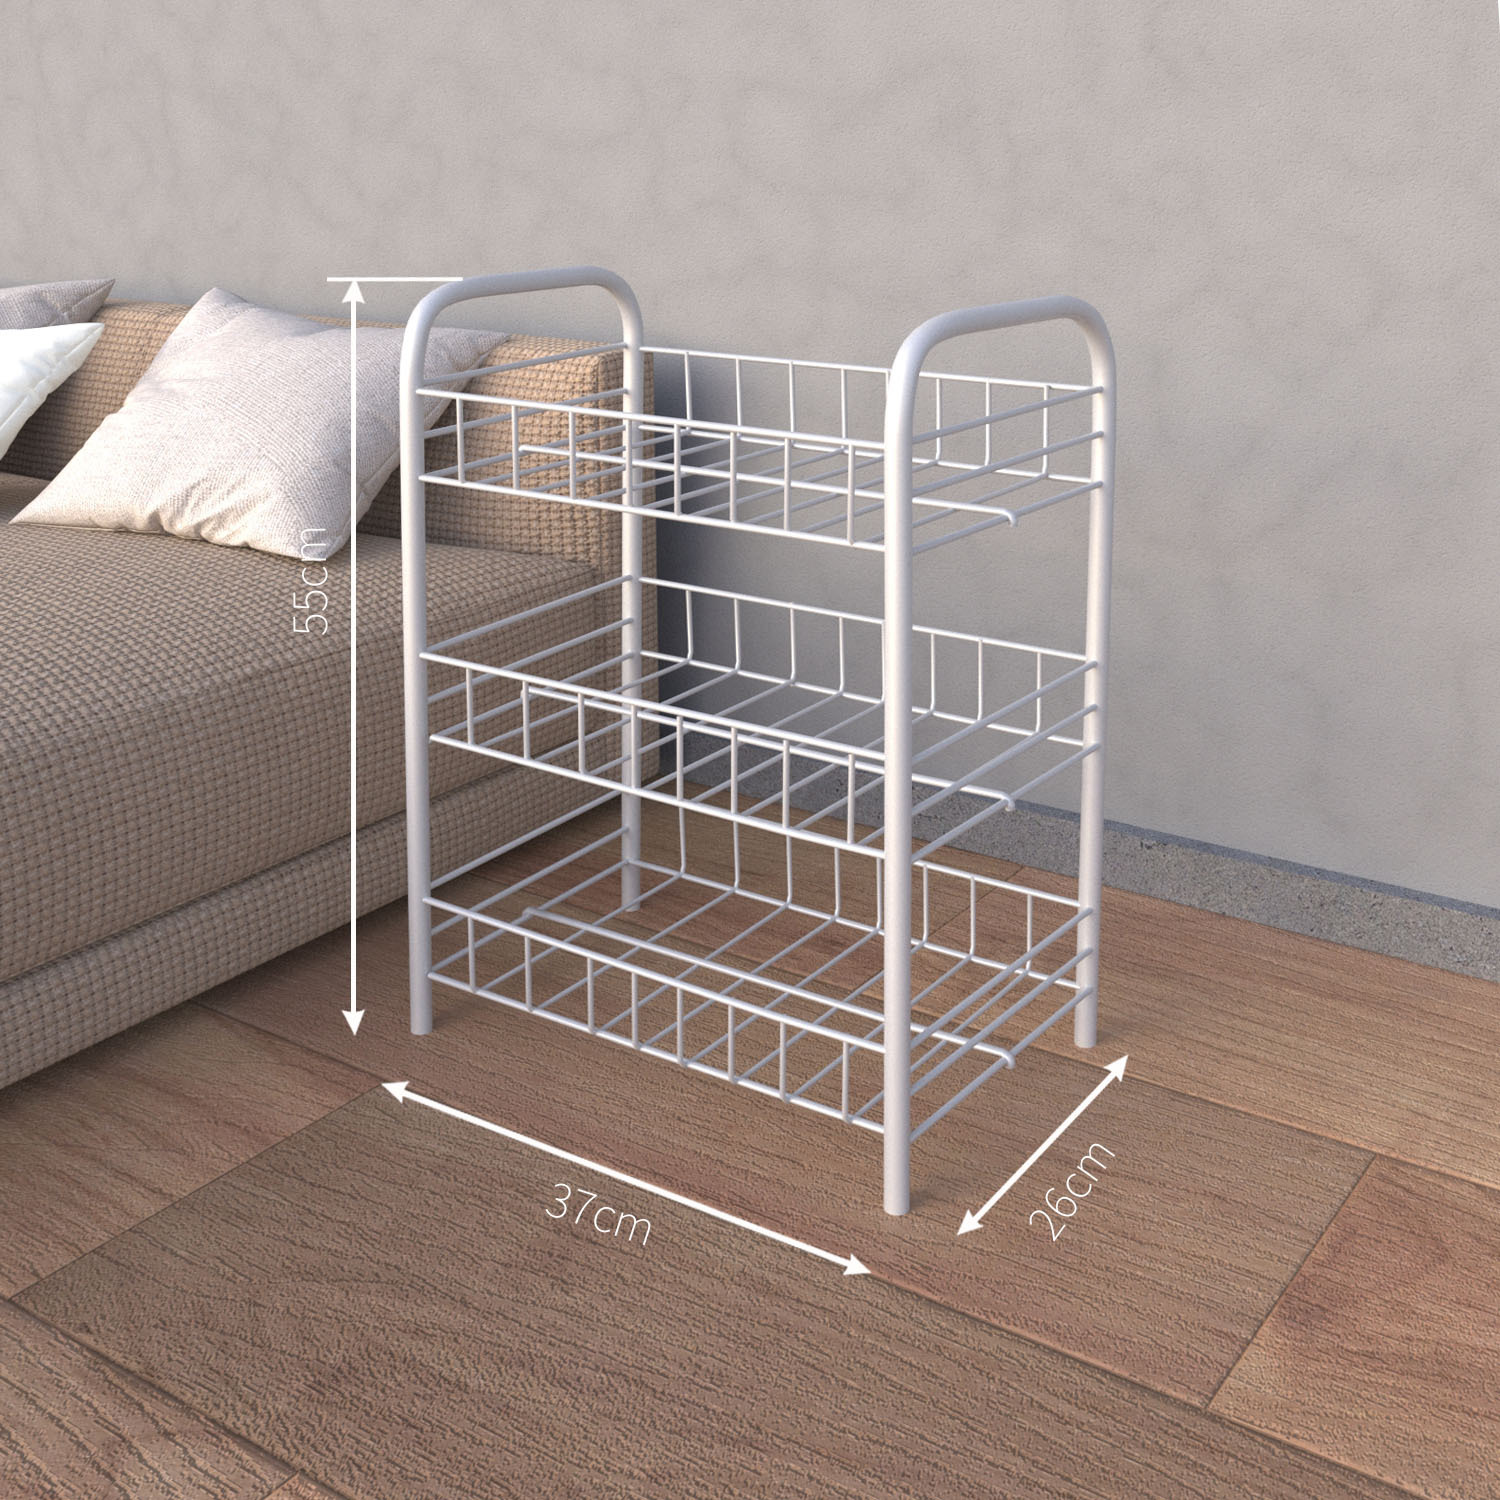 3 layers of white-iron wire rack